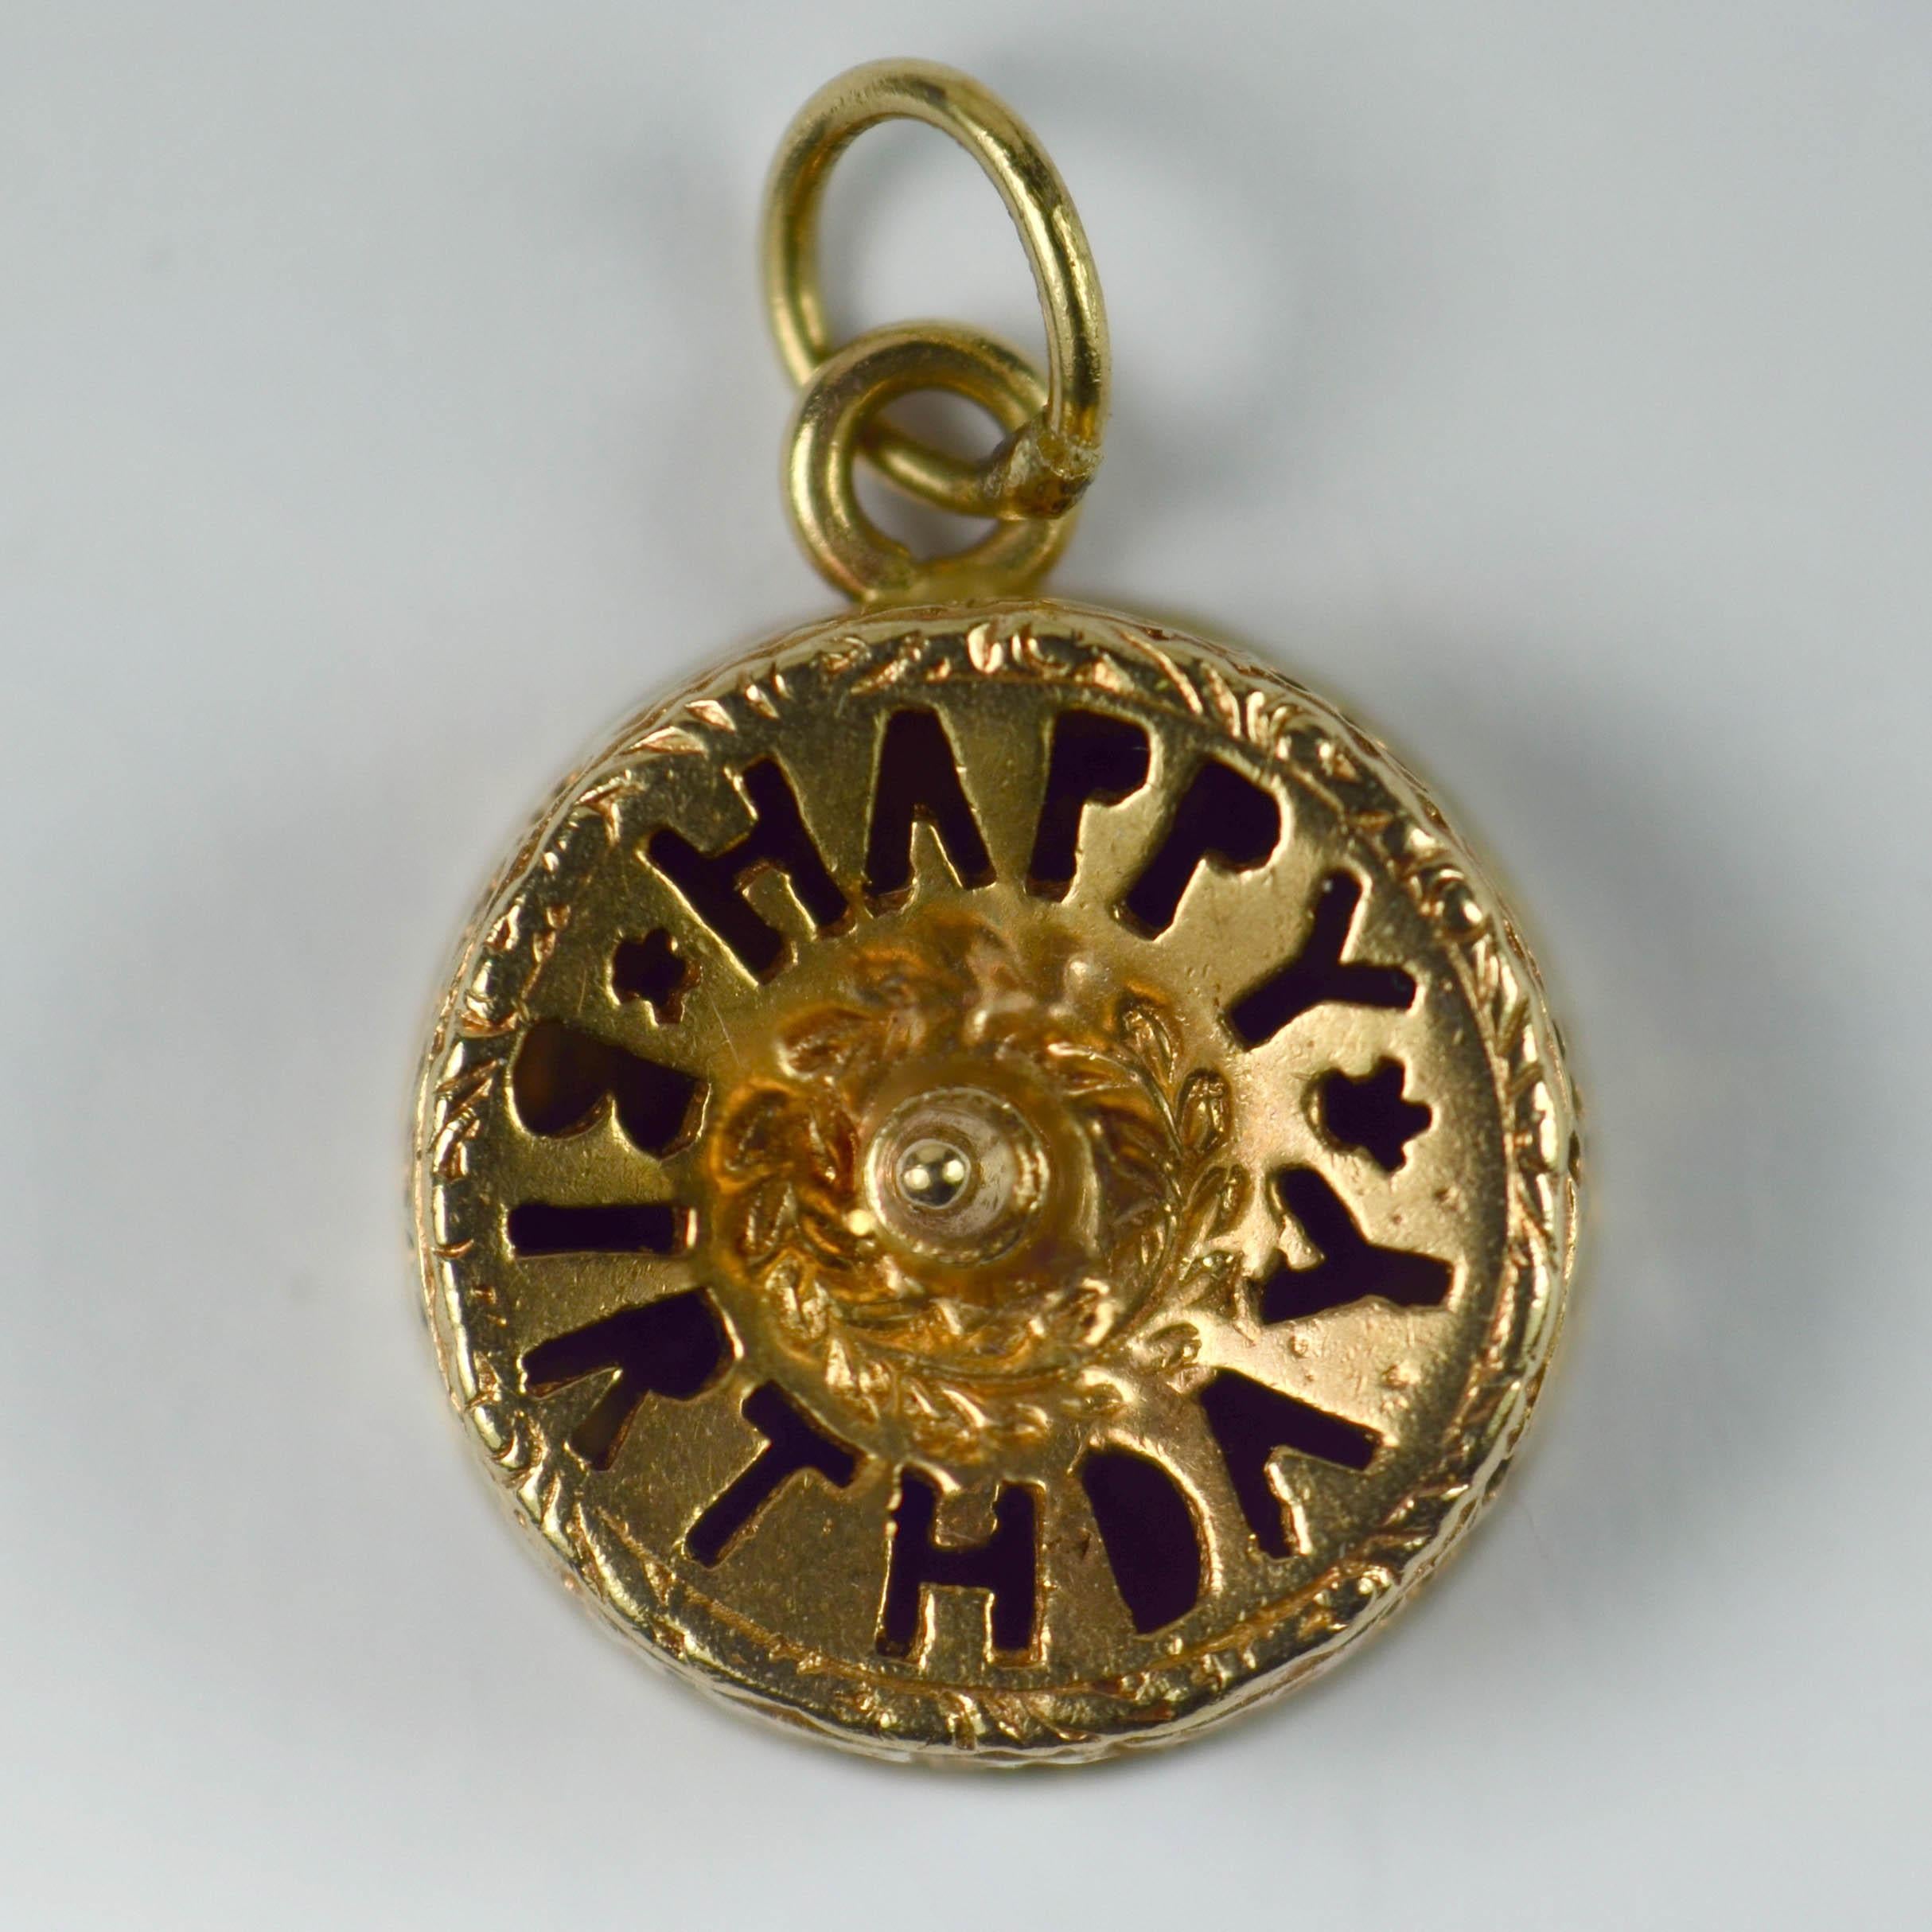 A 14 karat yellow gold charm pendant designed as a birthday cake with candle with the pierced words Happy Birthday to the top and a pierced floral design to the sides.
Marked 14K and copyright AC to the base.

Dimensions: 2 x 1.4 x 1 cm
Weight: 2.47